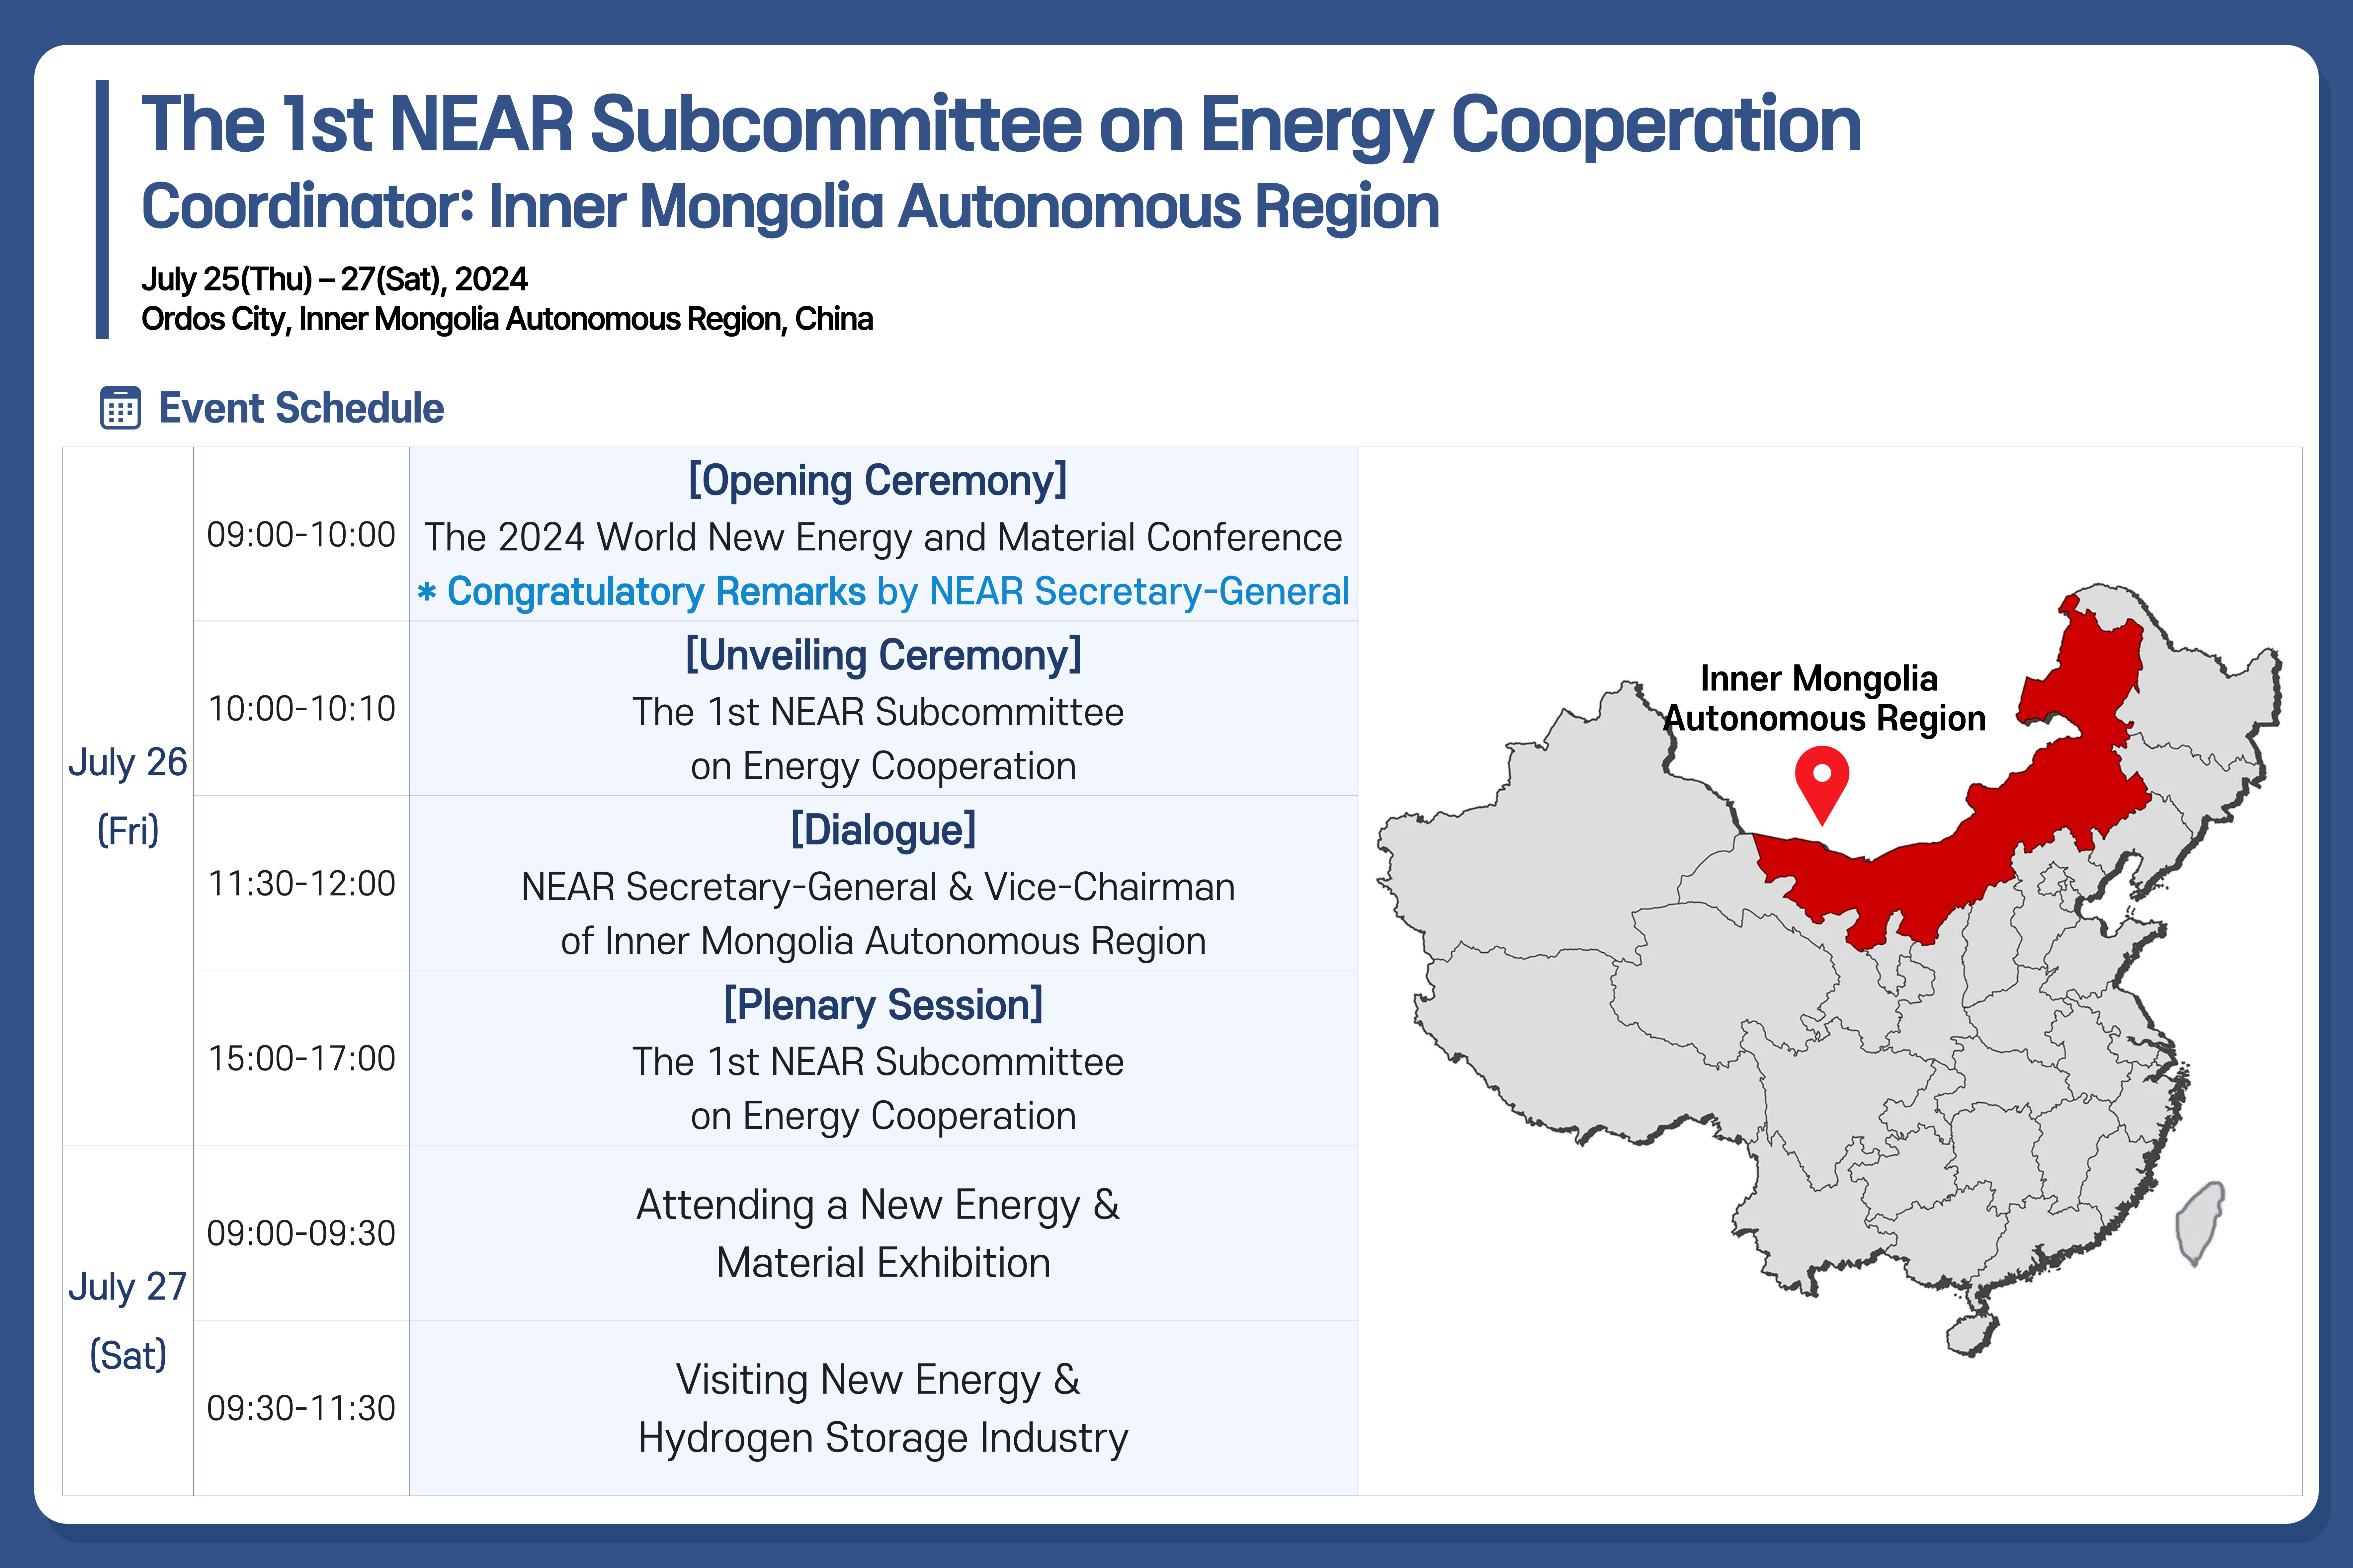 NEAR Secretariat Supports Inner Mongolia Autonomous Region, China, in Promoting the NEAR Subcommittee on Energy Cooperation